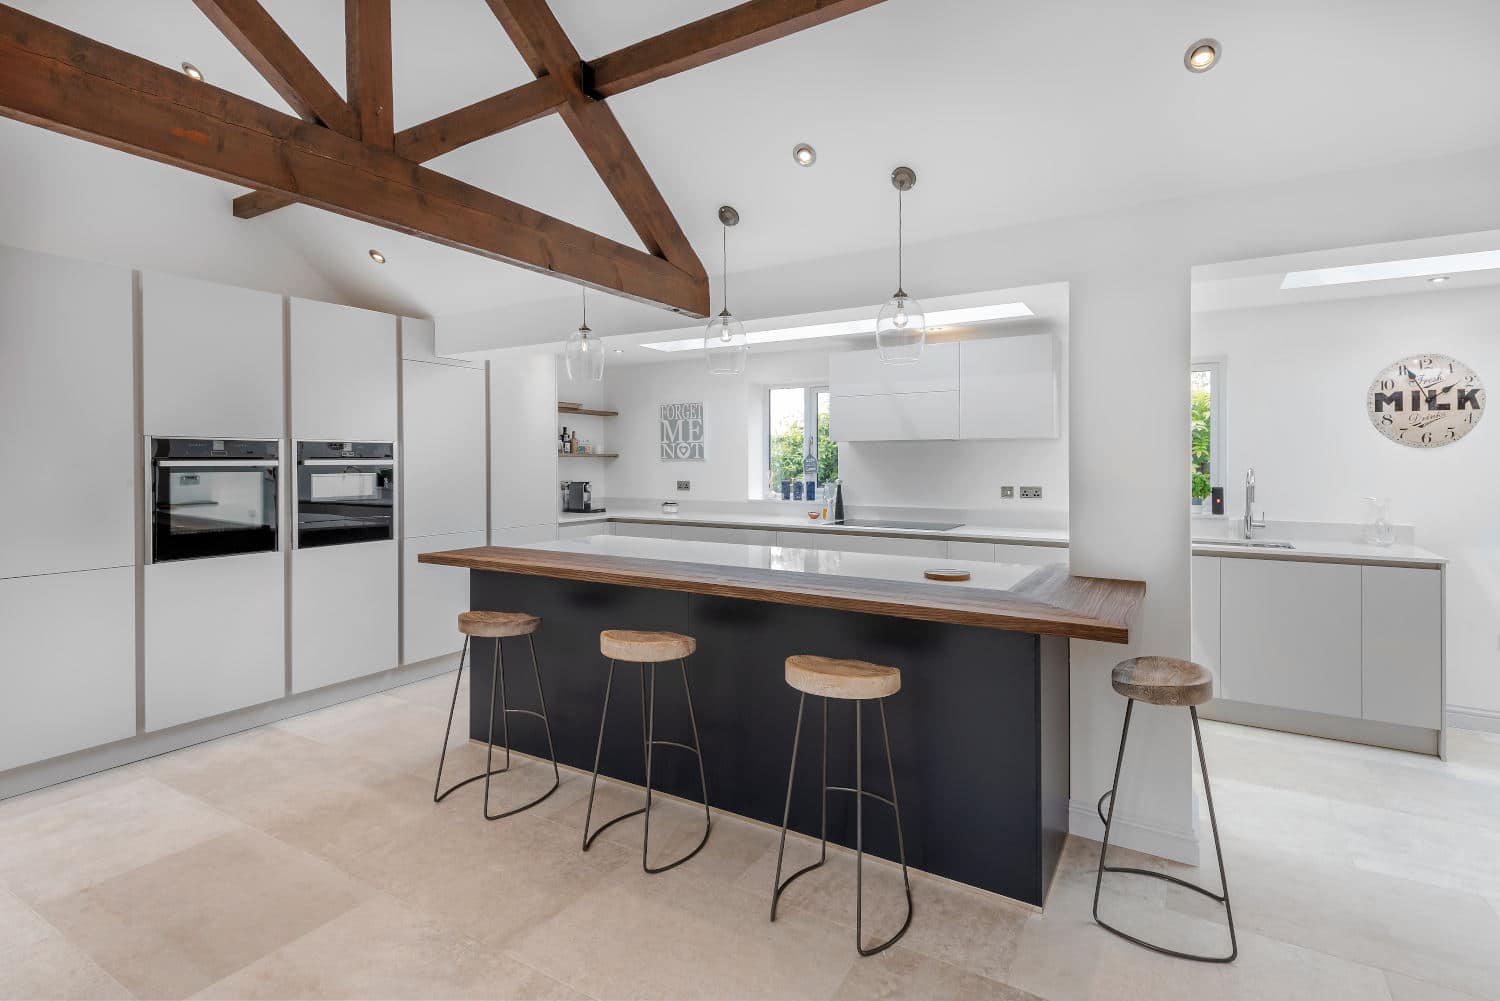 Image of Pond House ph3 by Elmore Kitchens in A stylish, on-trend kitchen - Cosentino